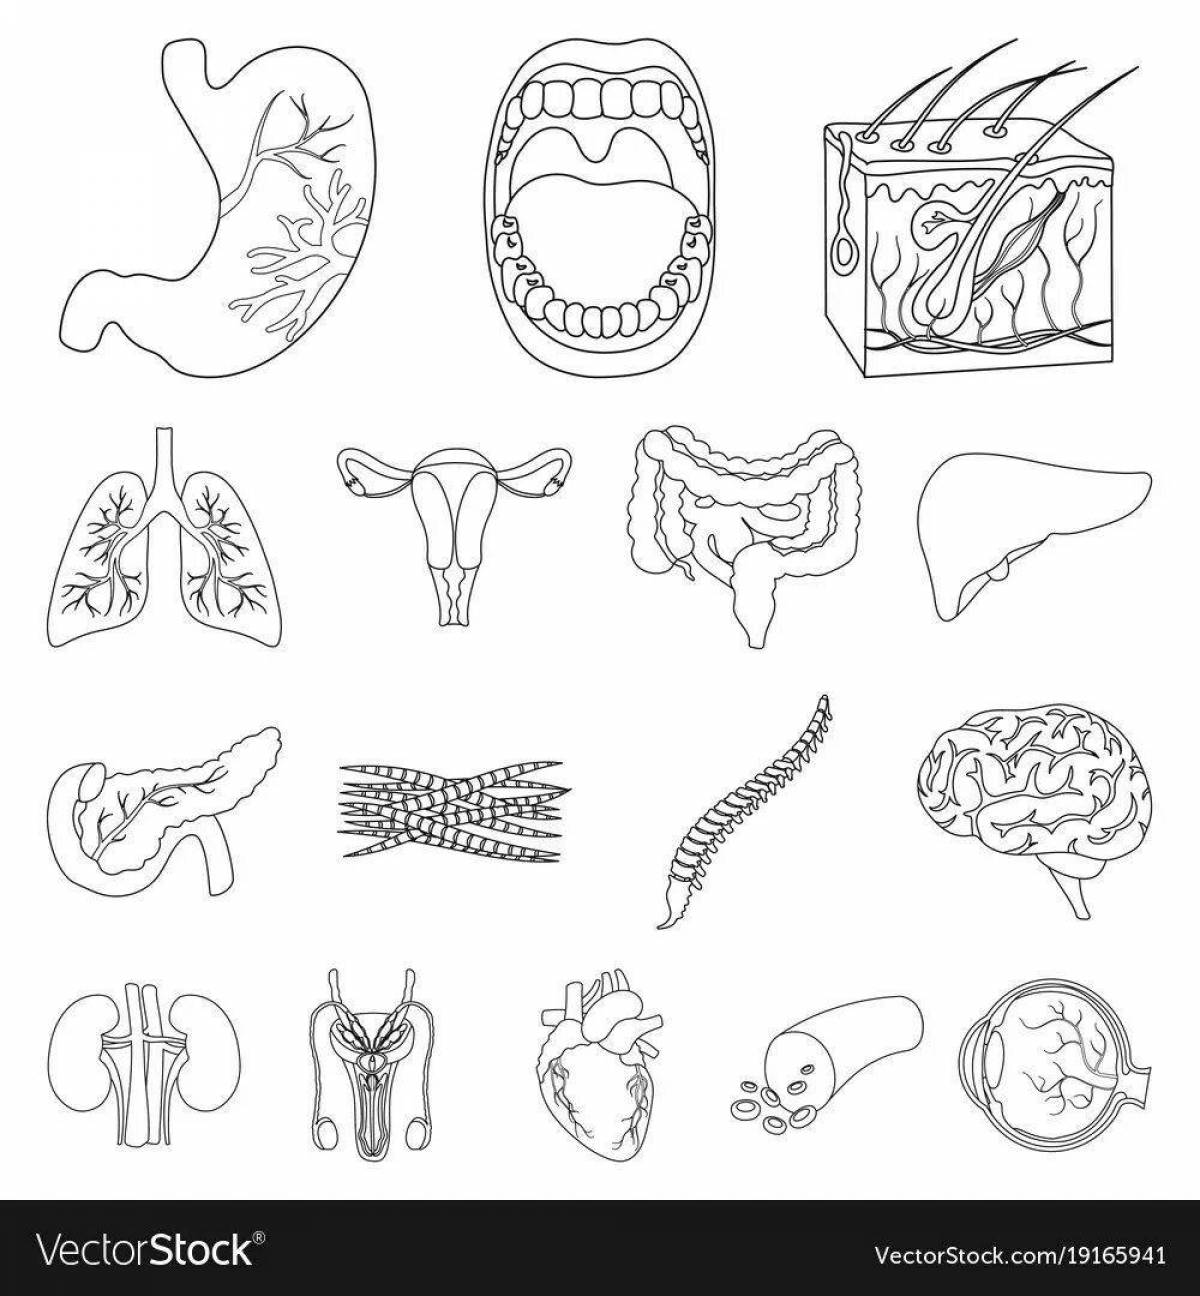 Intricate human anatomy coloring page for kids